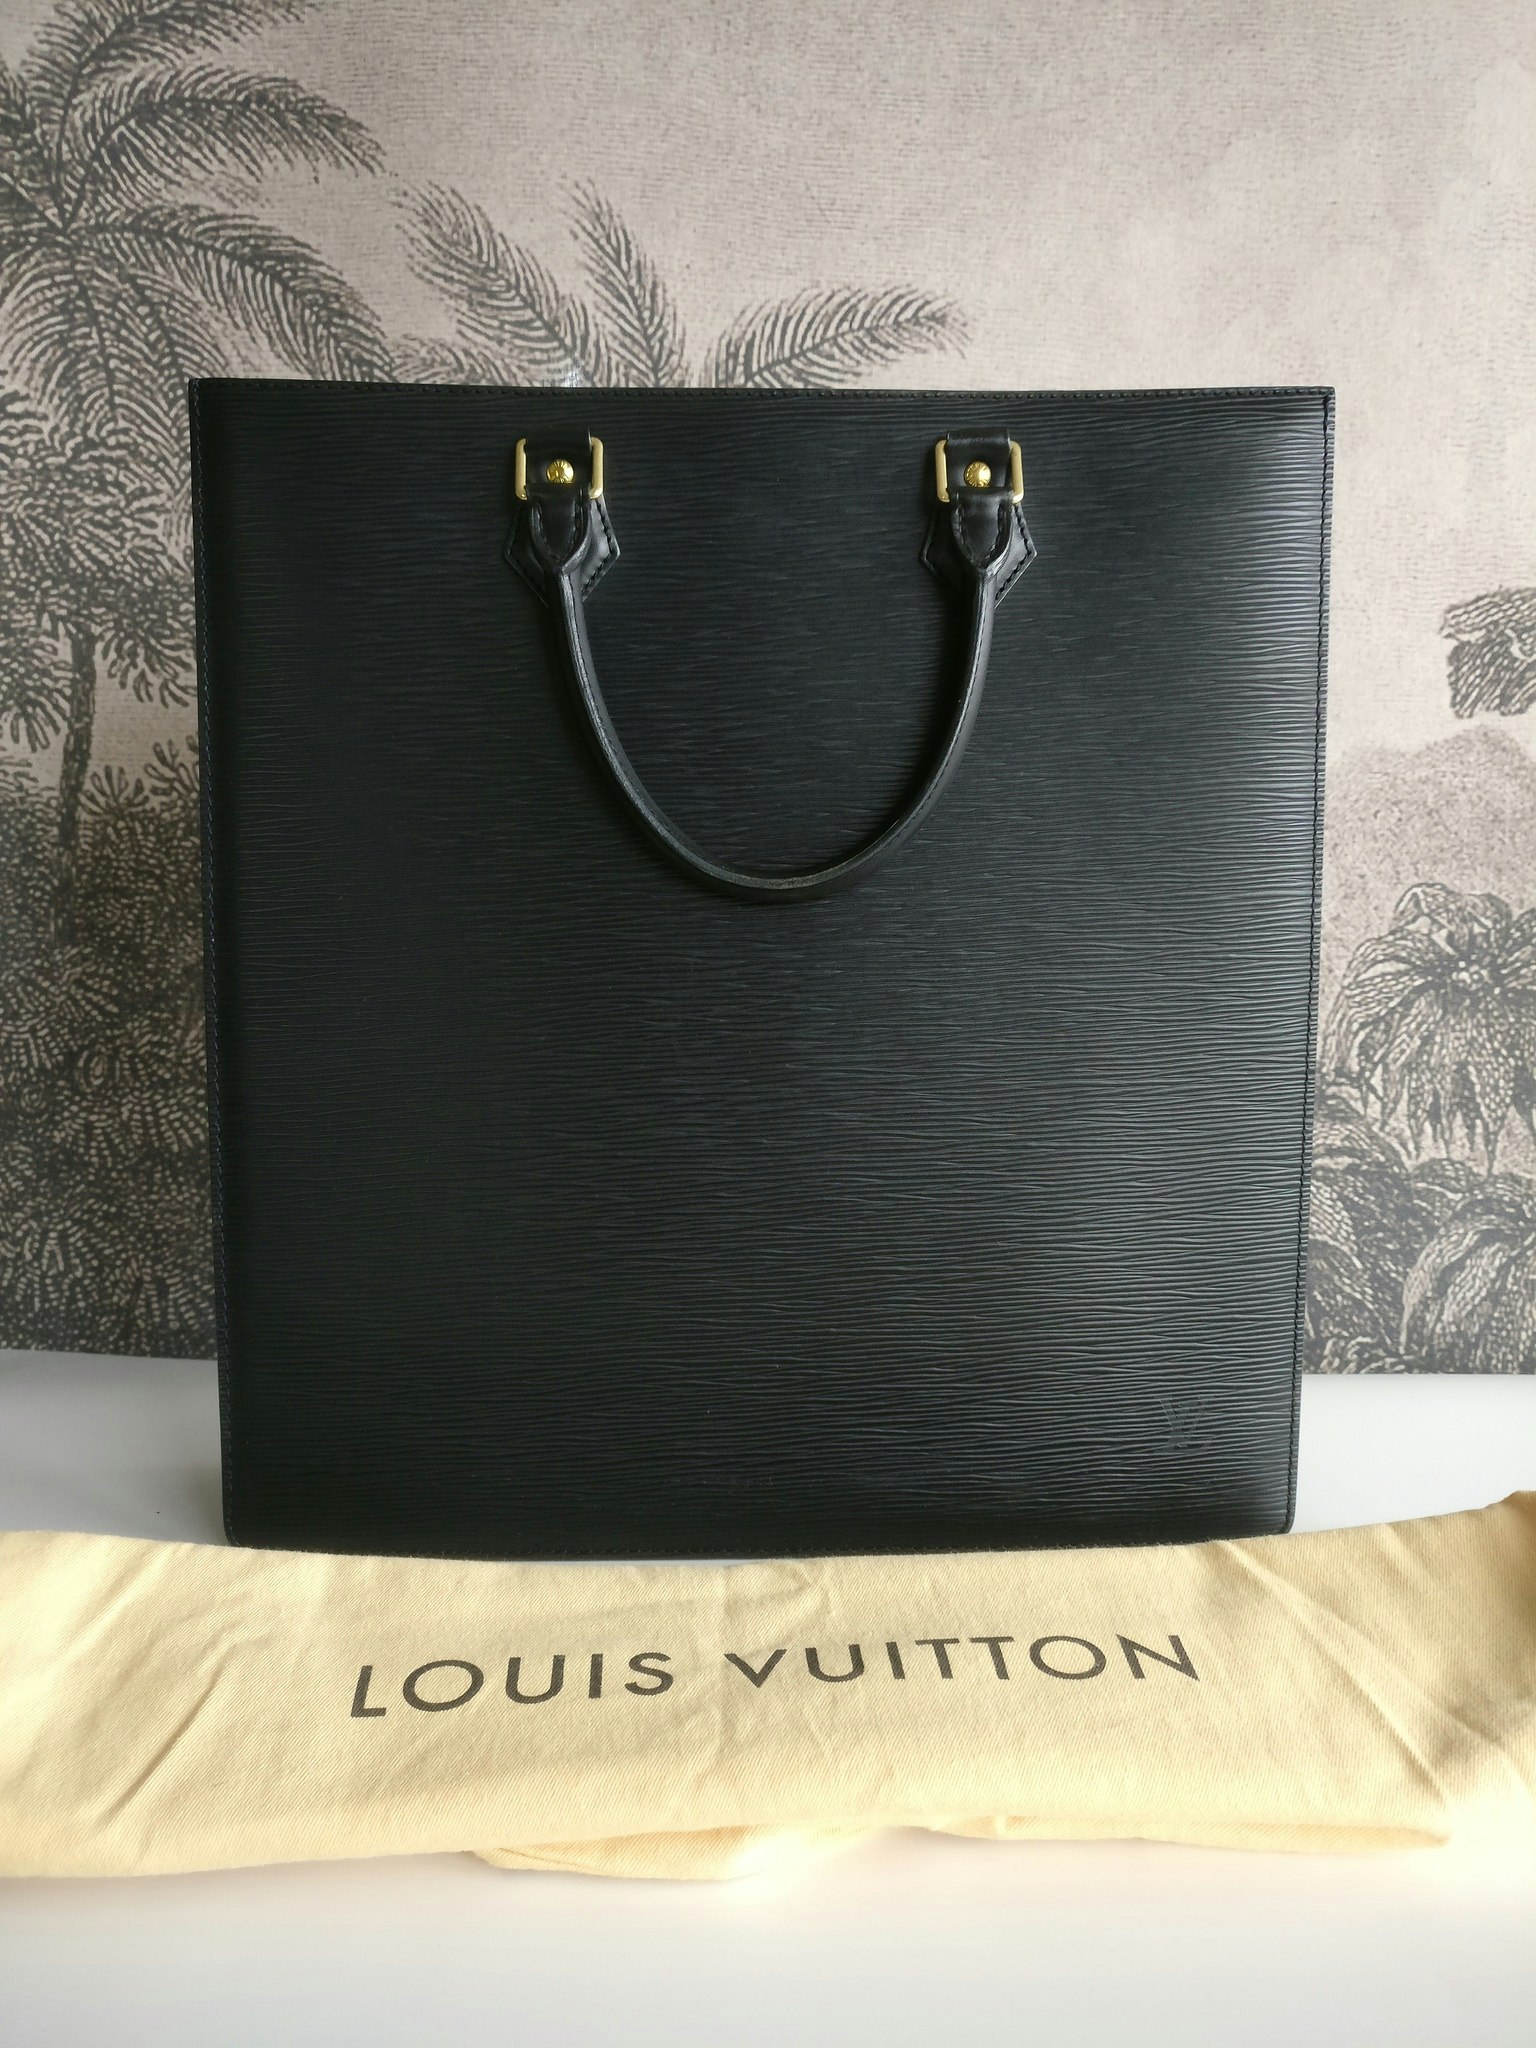 Louis Vuitton Authentic Sac Plat Tote Black Epi Leather - Beverly